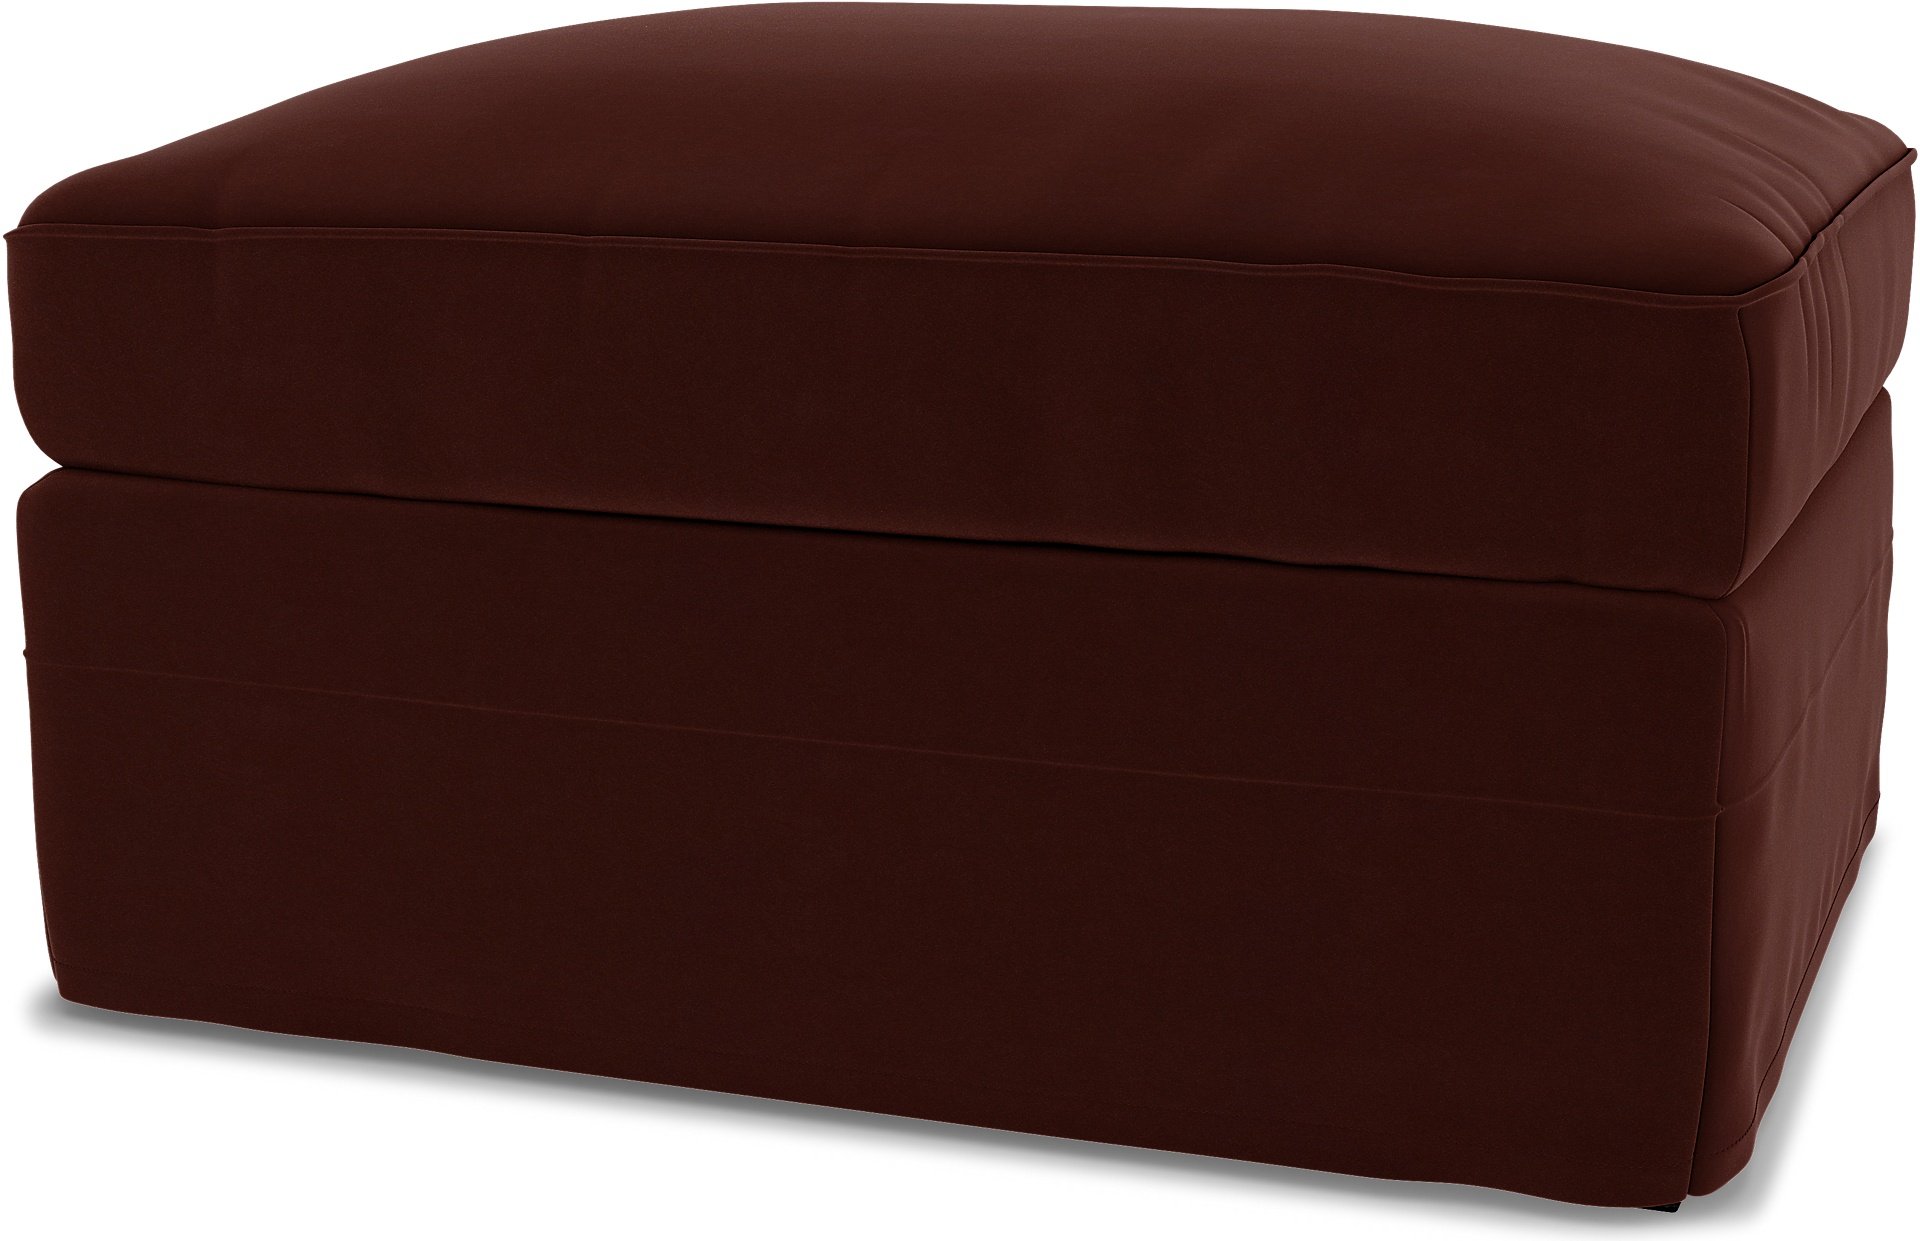 IKEA - Gronlid Footstool with Storage Cover, Ground Coffee, Velvet - Bemz